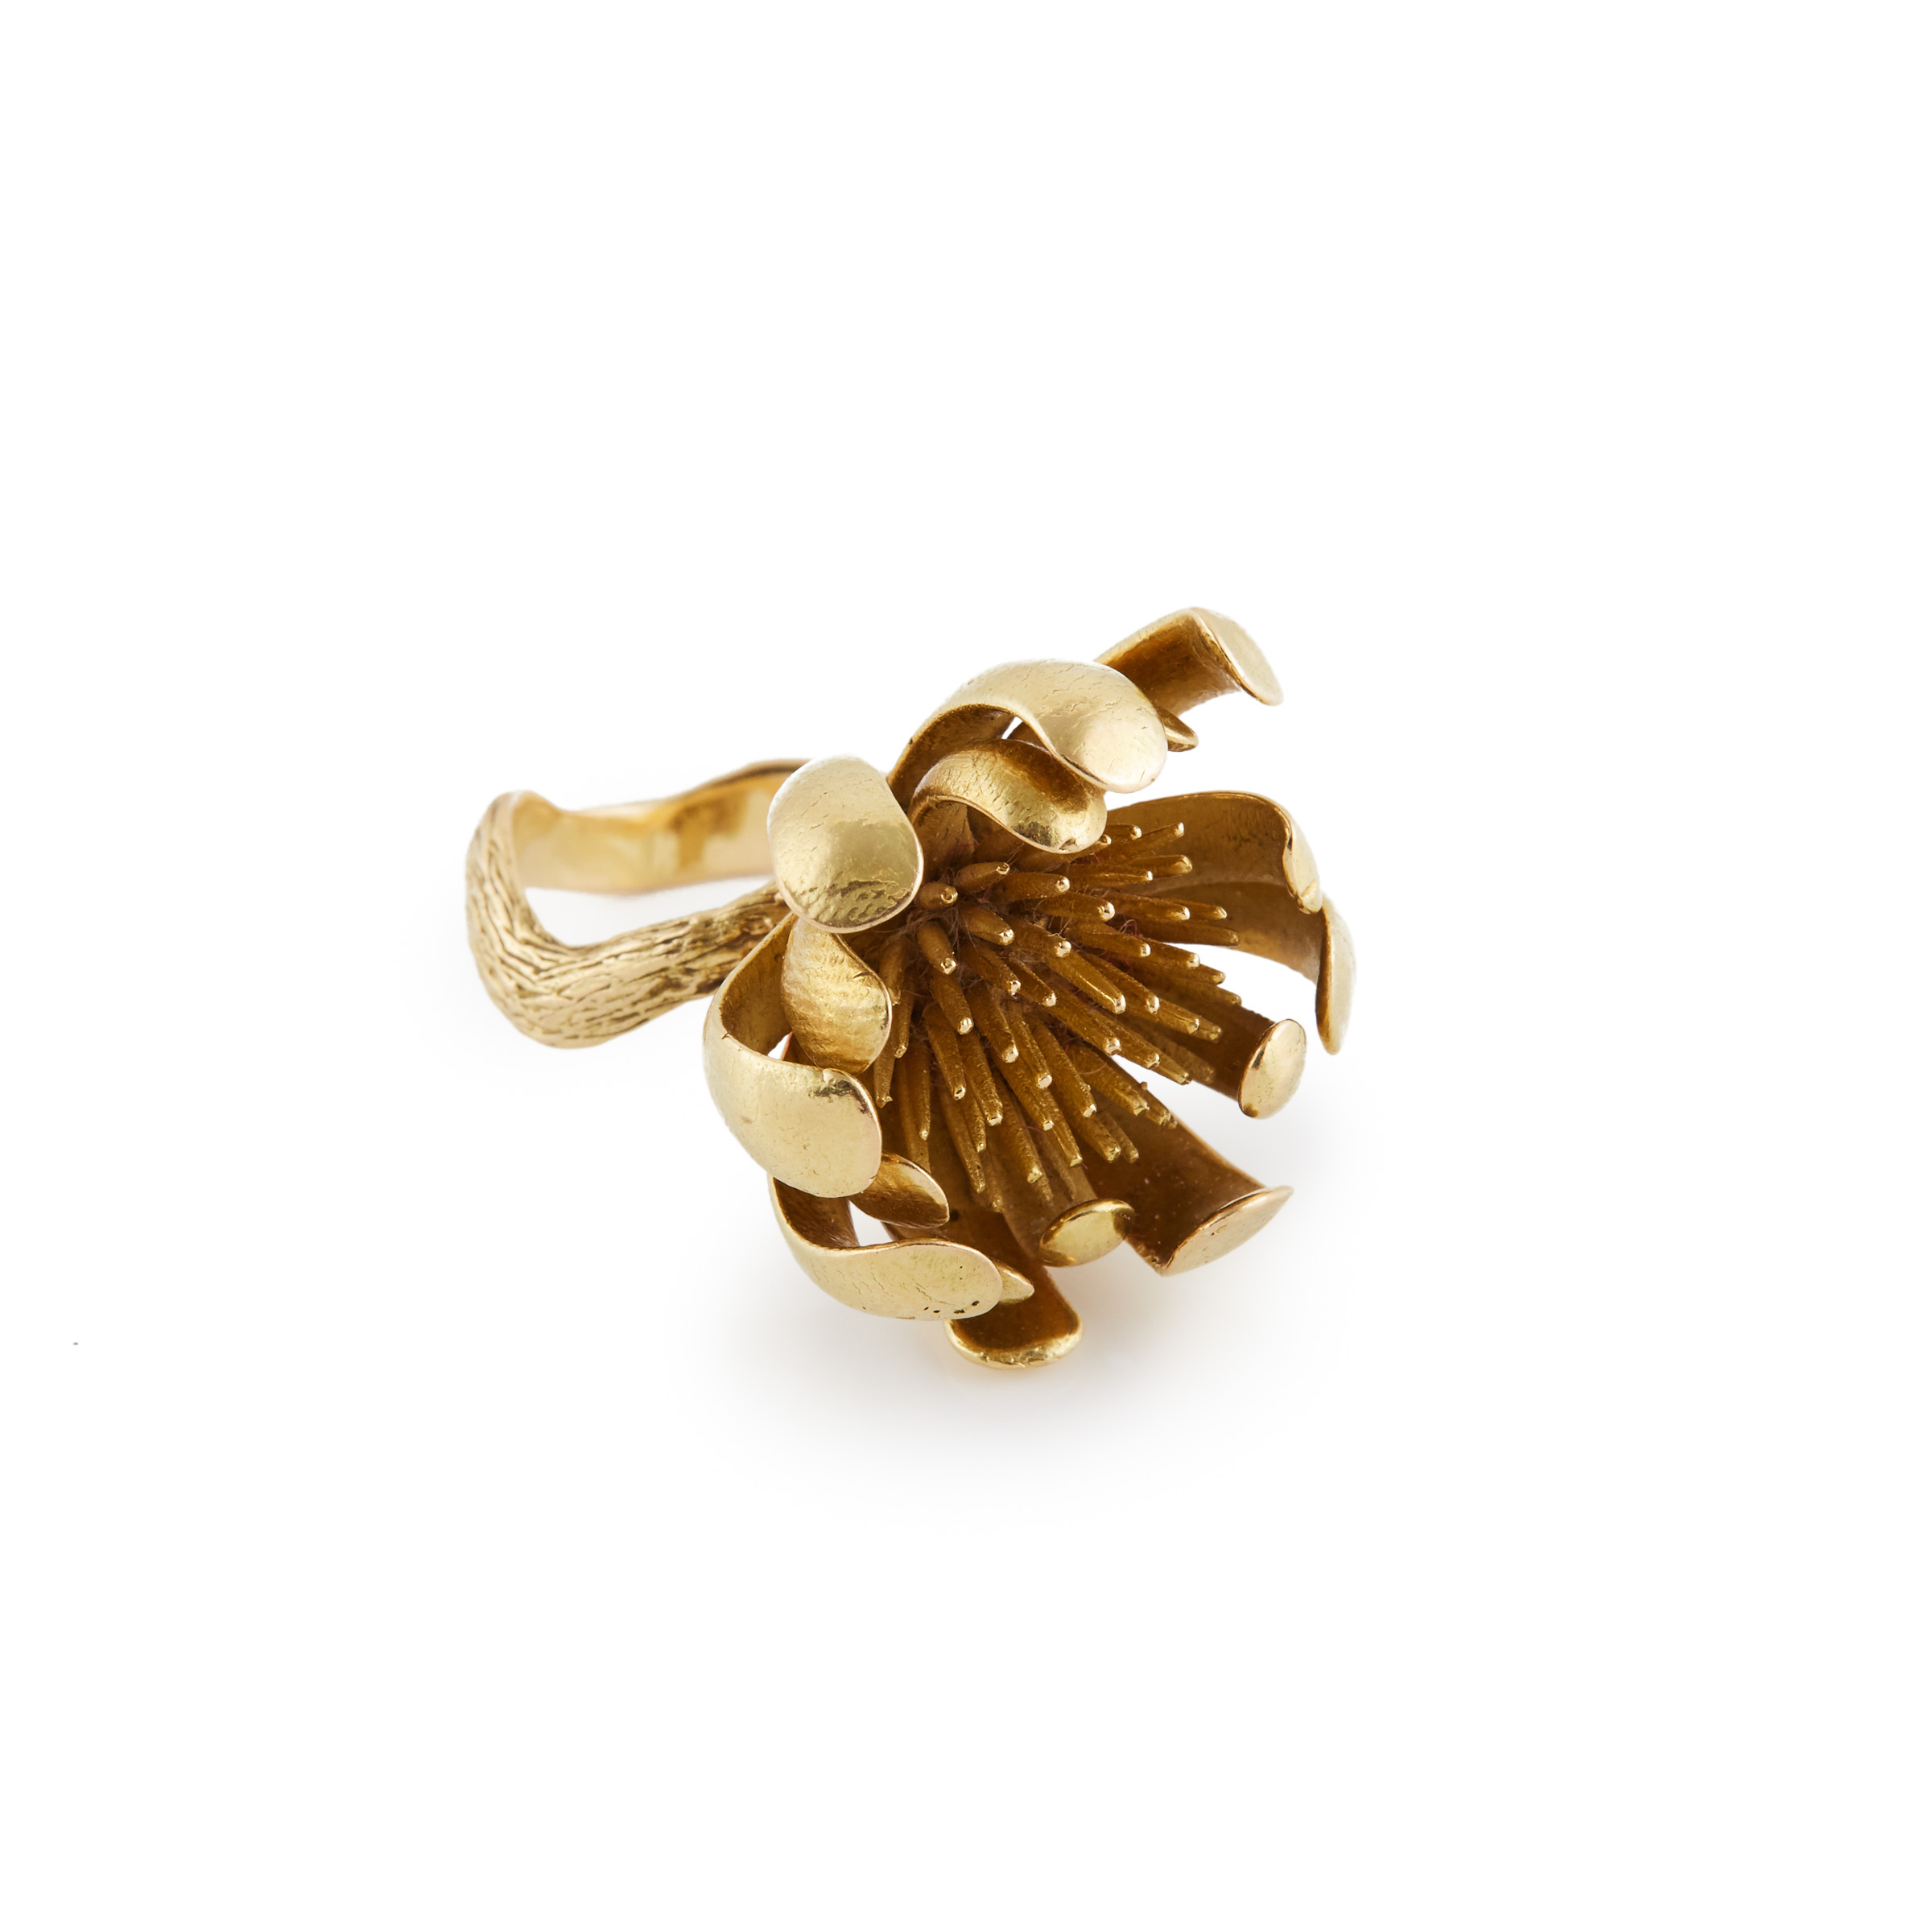 Unusual 18k Yellow Gold Sculpted Ring